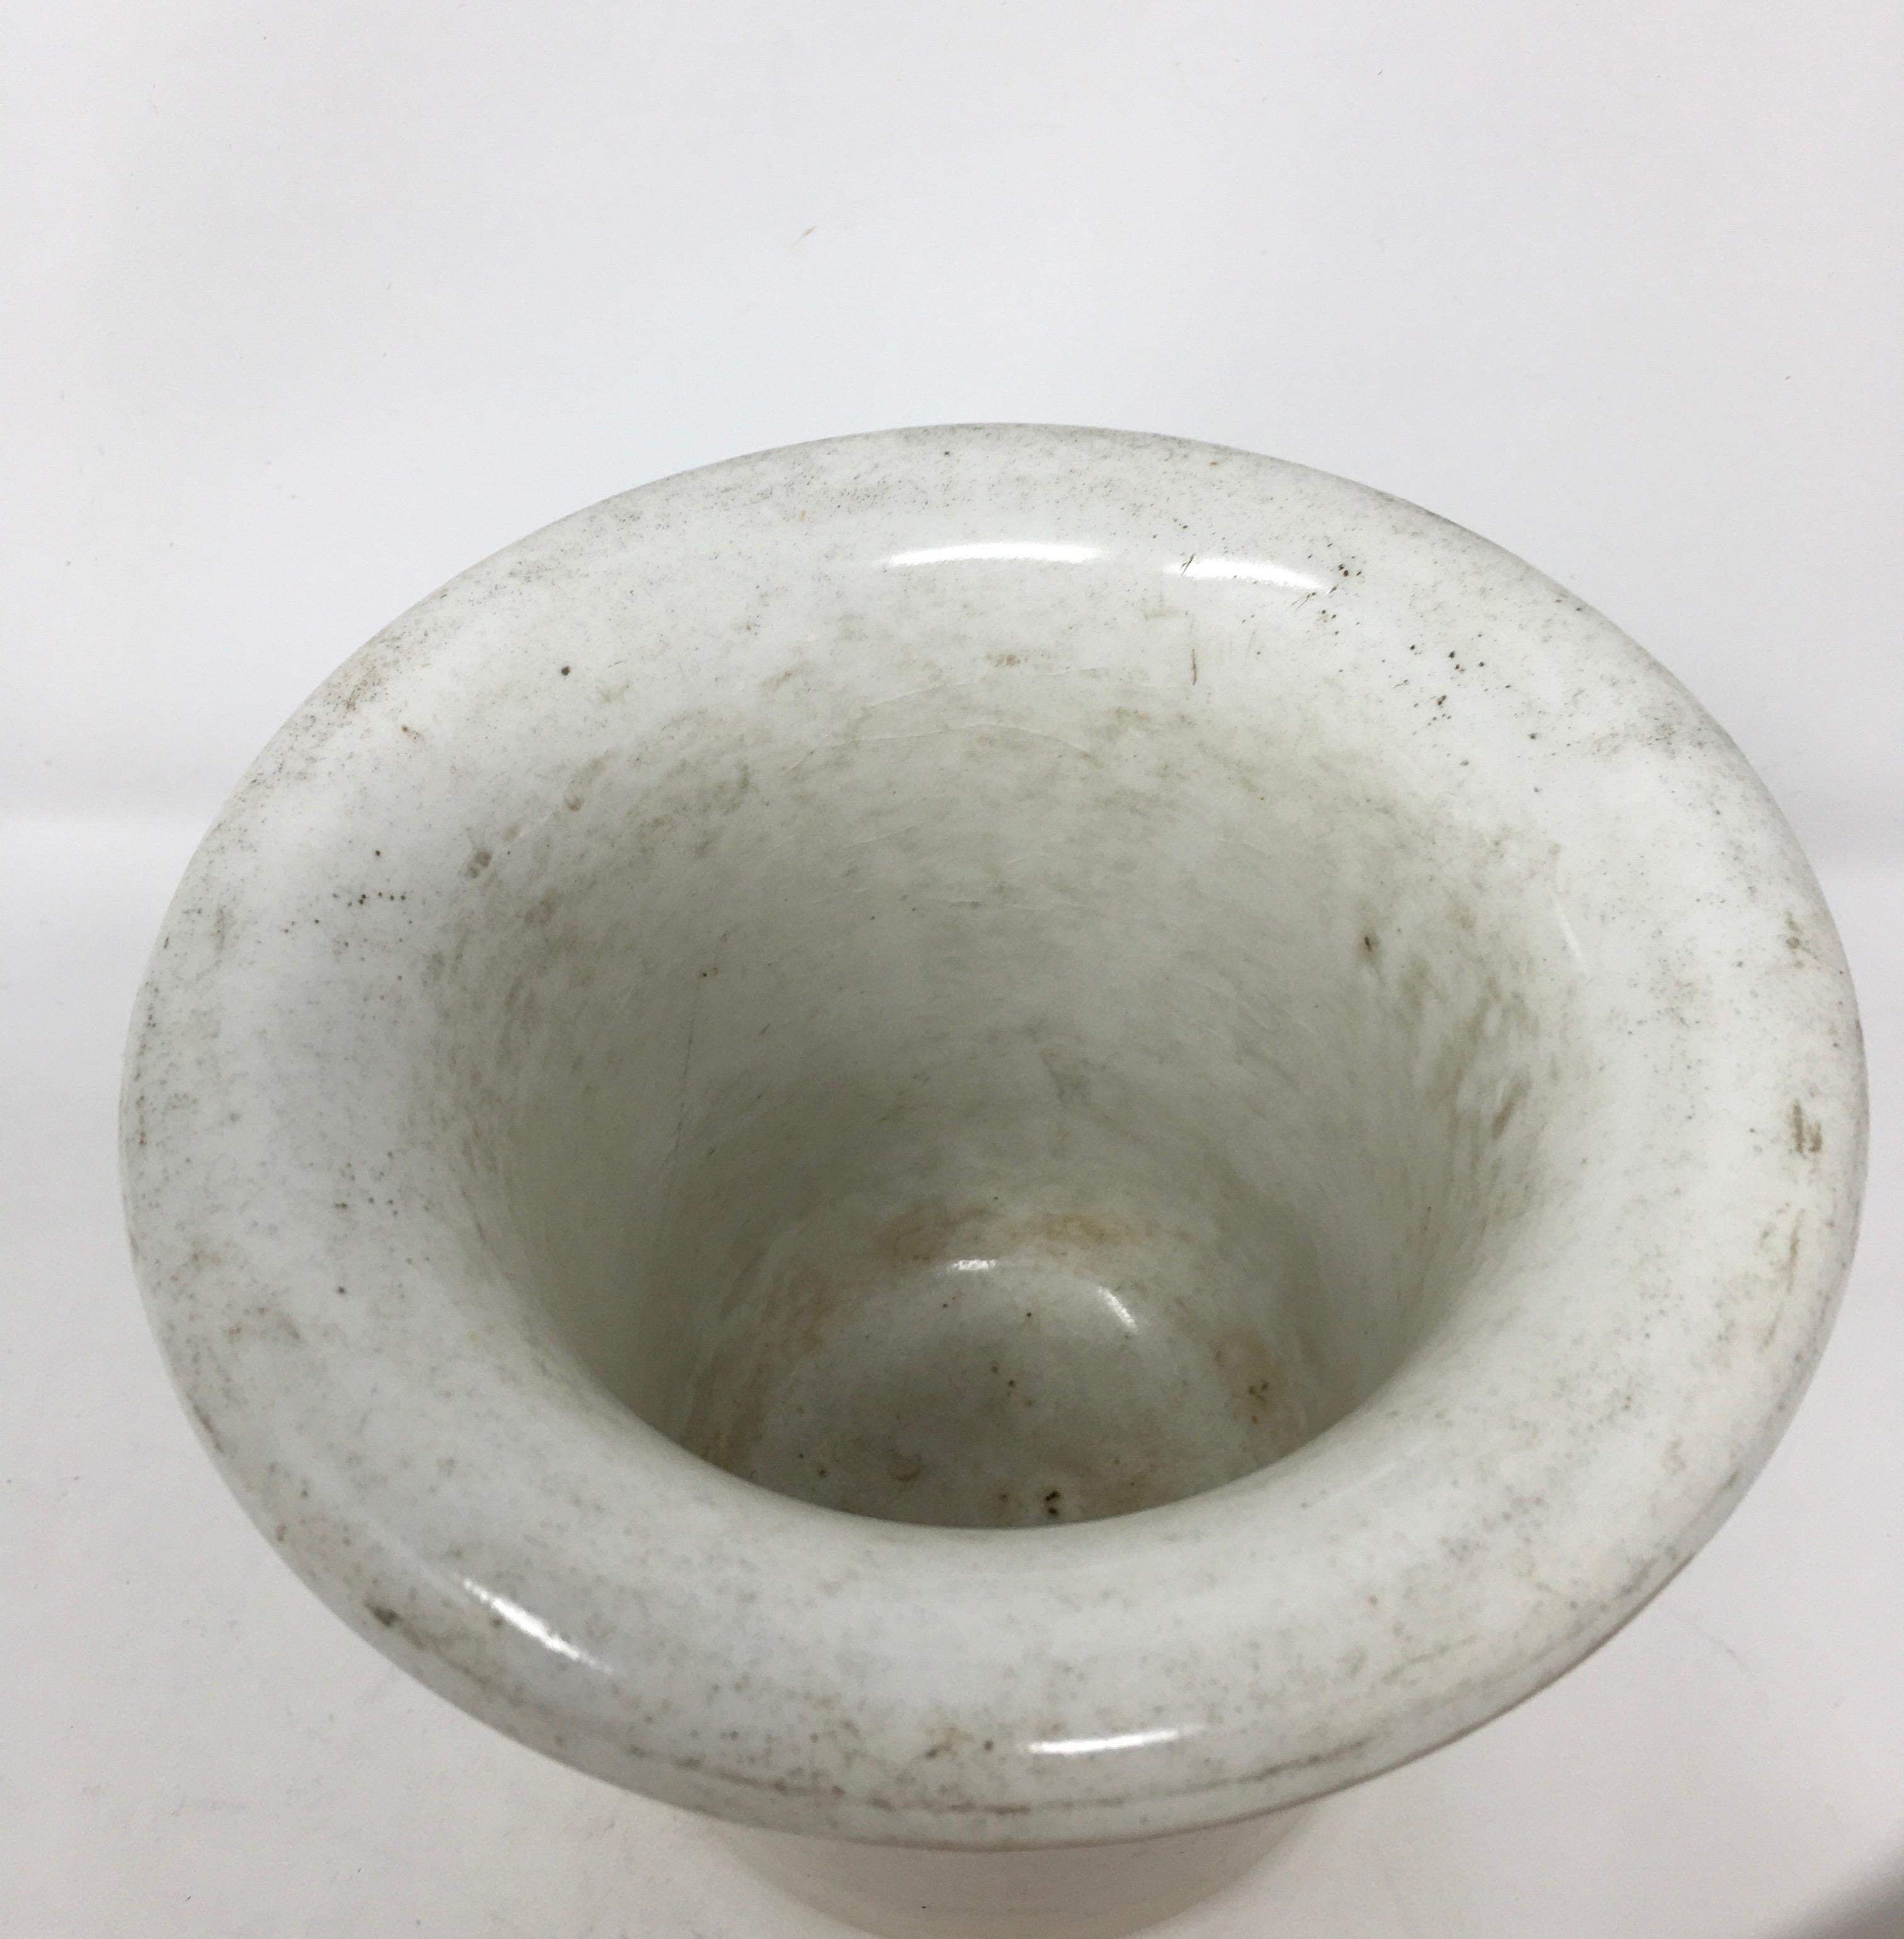 Other Porcelain Mortar and Pestle from France